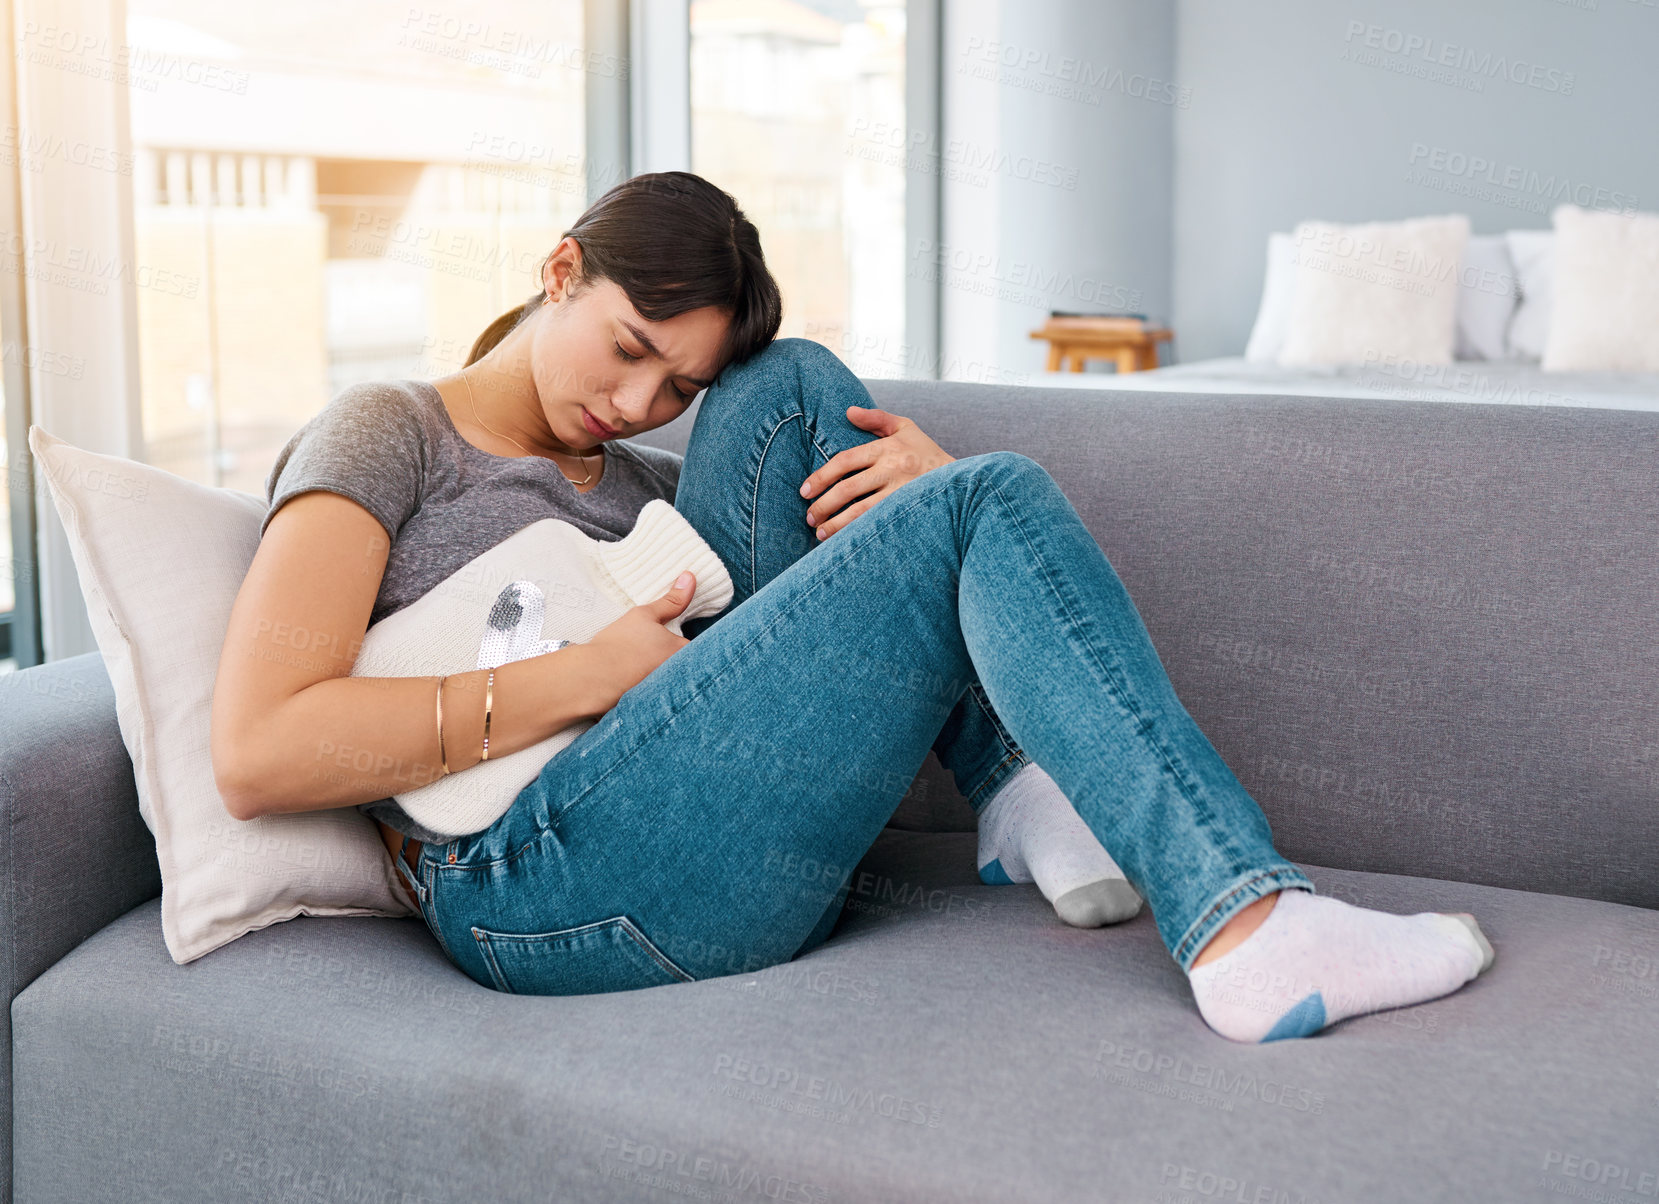 Buy stock photo Stomach pain, stress or girl on sofa with hot water bottle for pms gas, constipation or period crisis at home. Tummy, digestion or anxiety in living room with heating pad for endometriosis or pcos